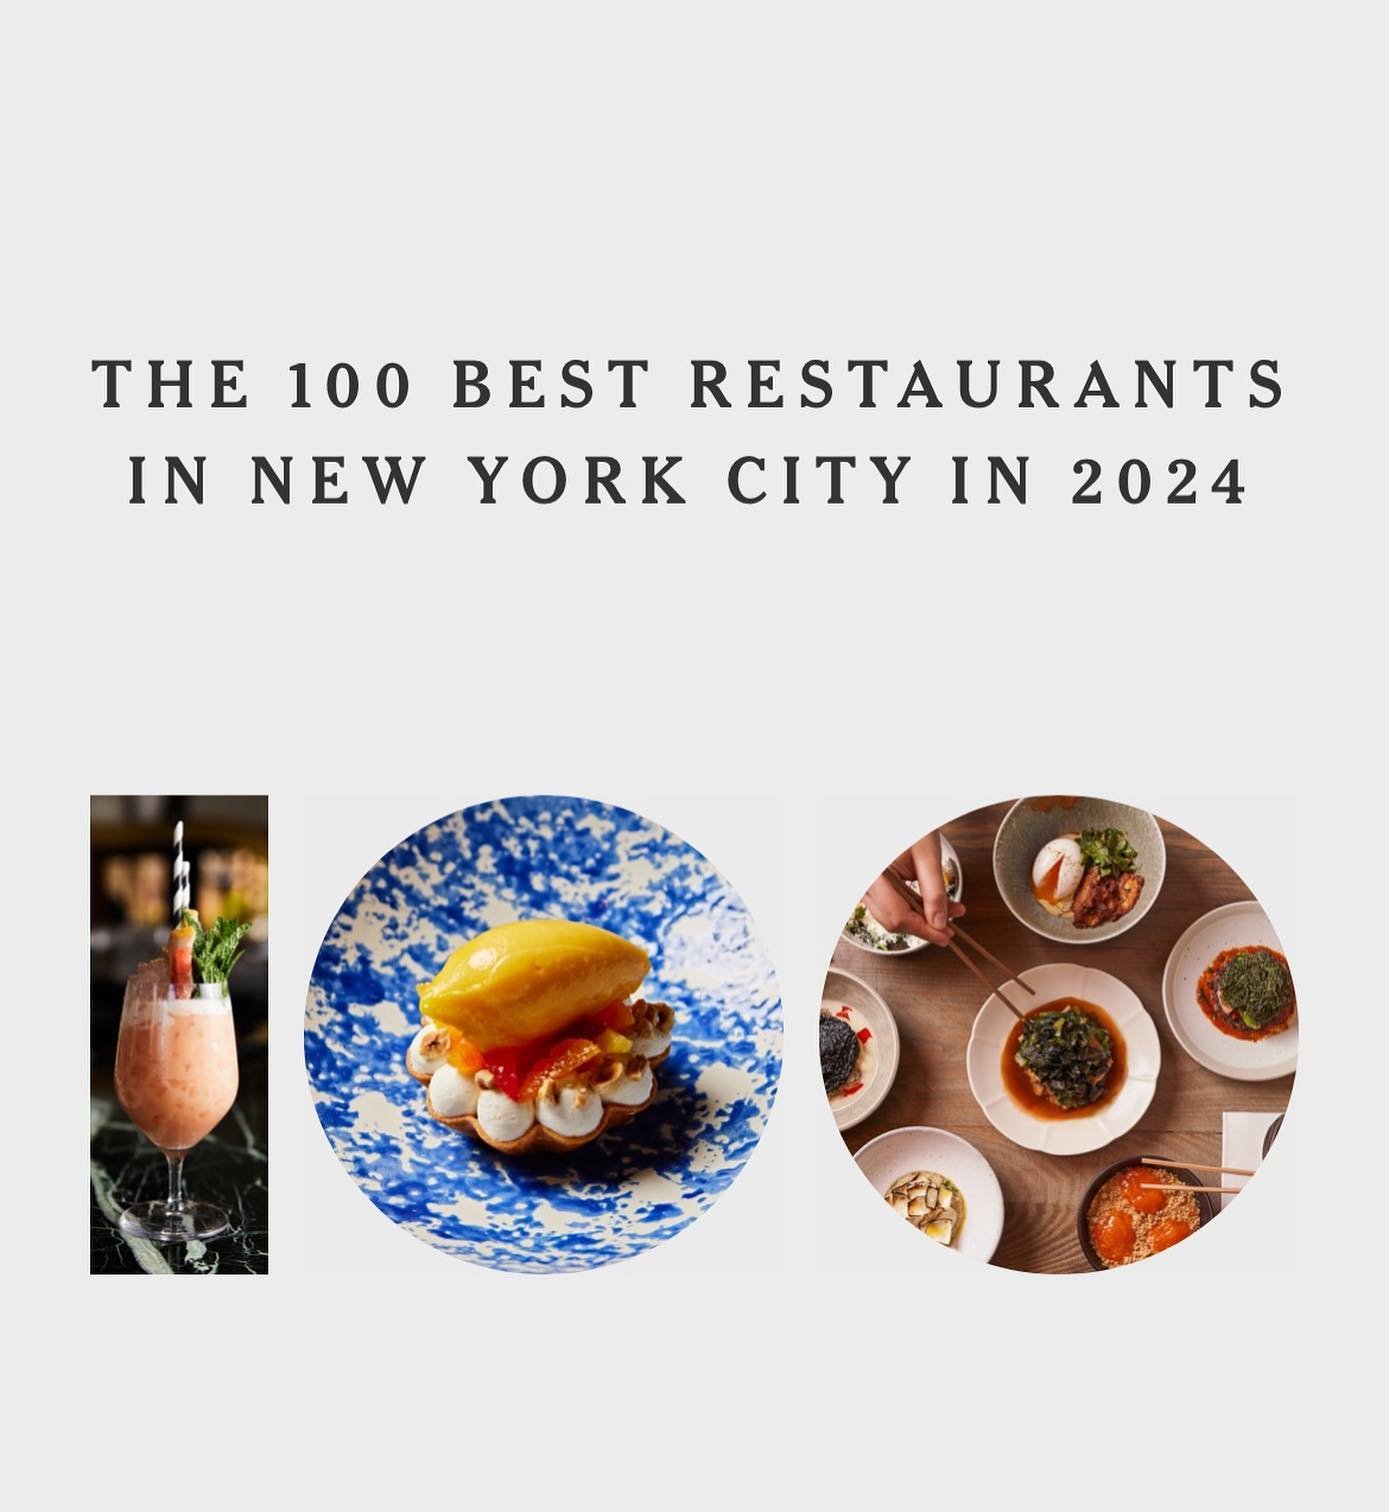 Congratulations to @cisiamonyc and @gramercytavern for being recognized as two of the 100 Best Restaurants in NYC by the @nytimes and @pete_wells. We&rsquo;re incredibly proud of our teams who bring relentless commitment, spirit, and passion to our r